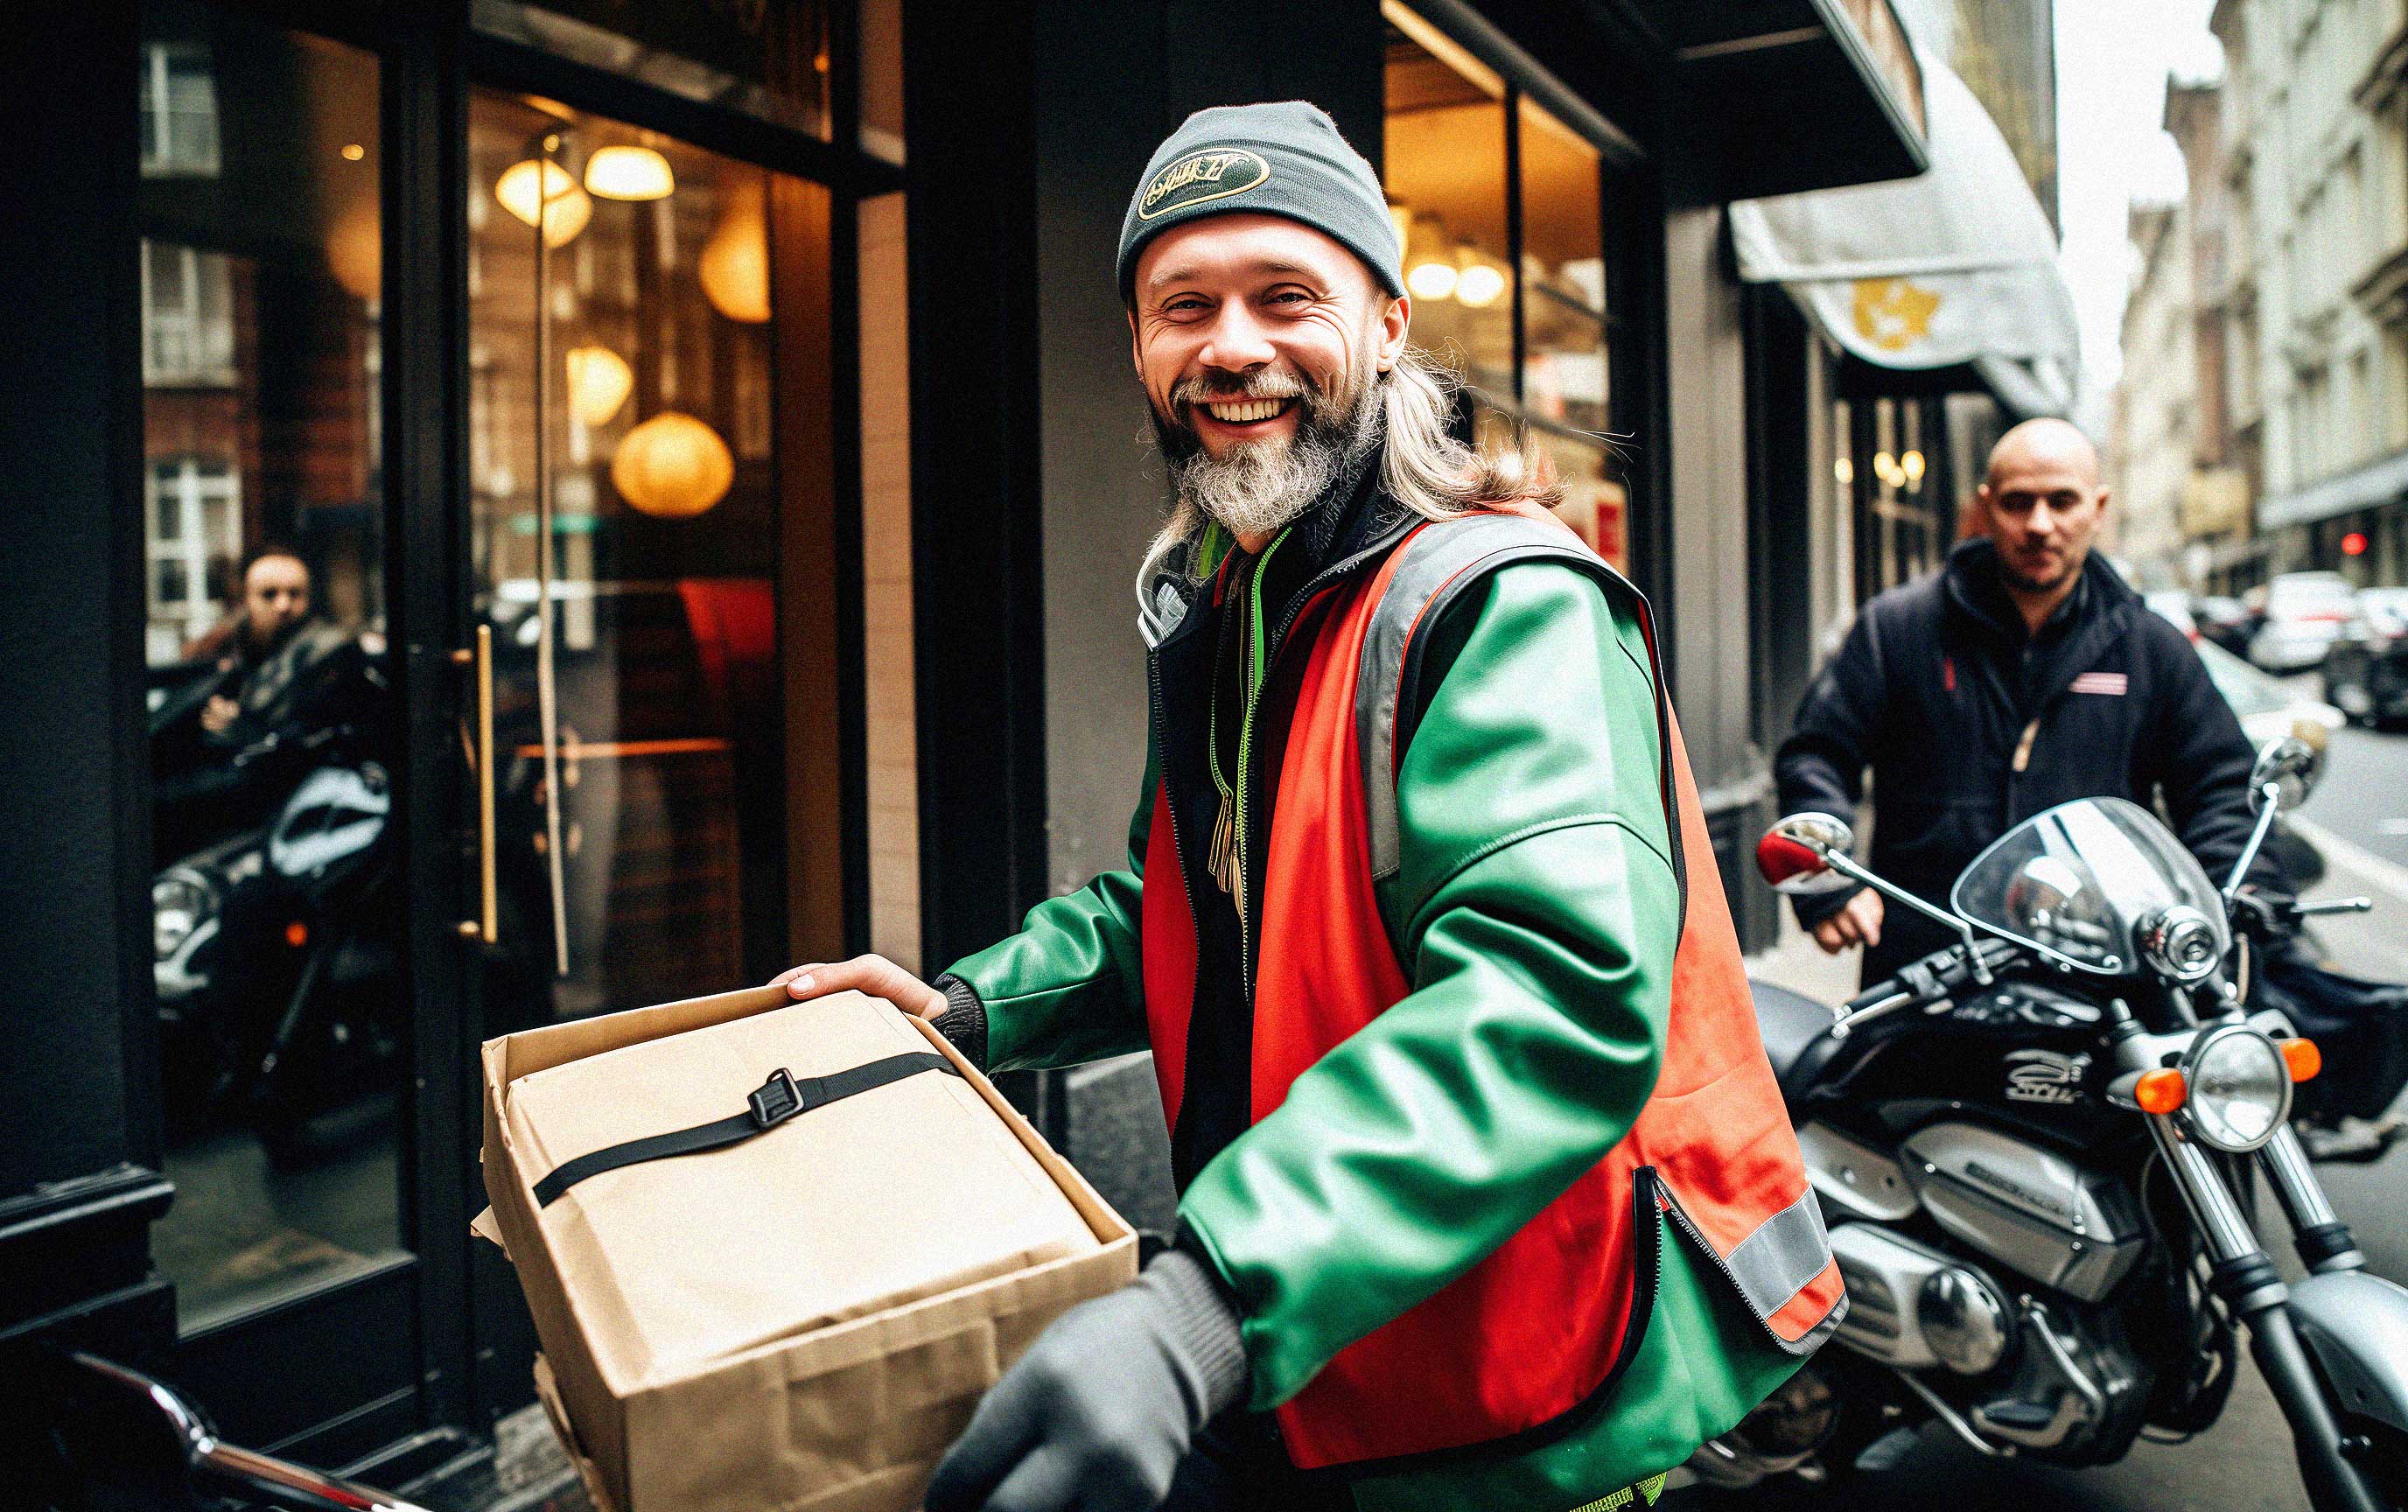 Delivery Options: The Easiest Way to Satisfy Your Customers